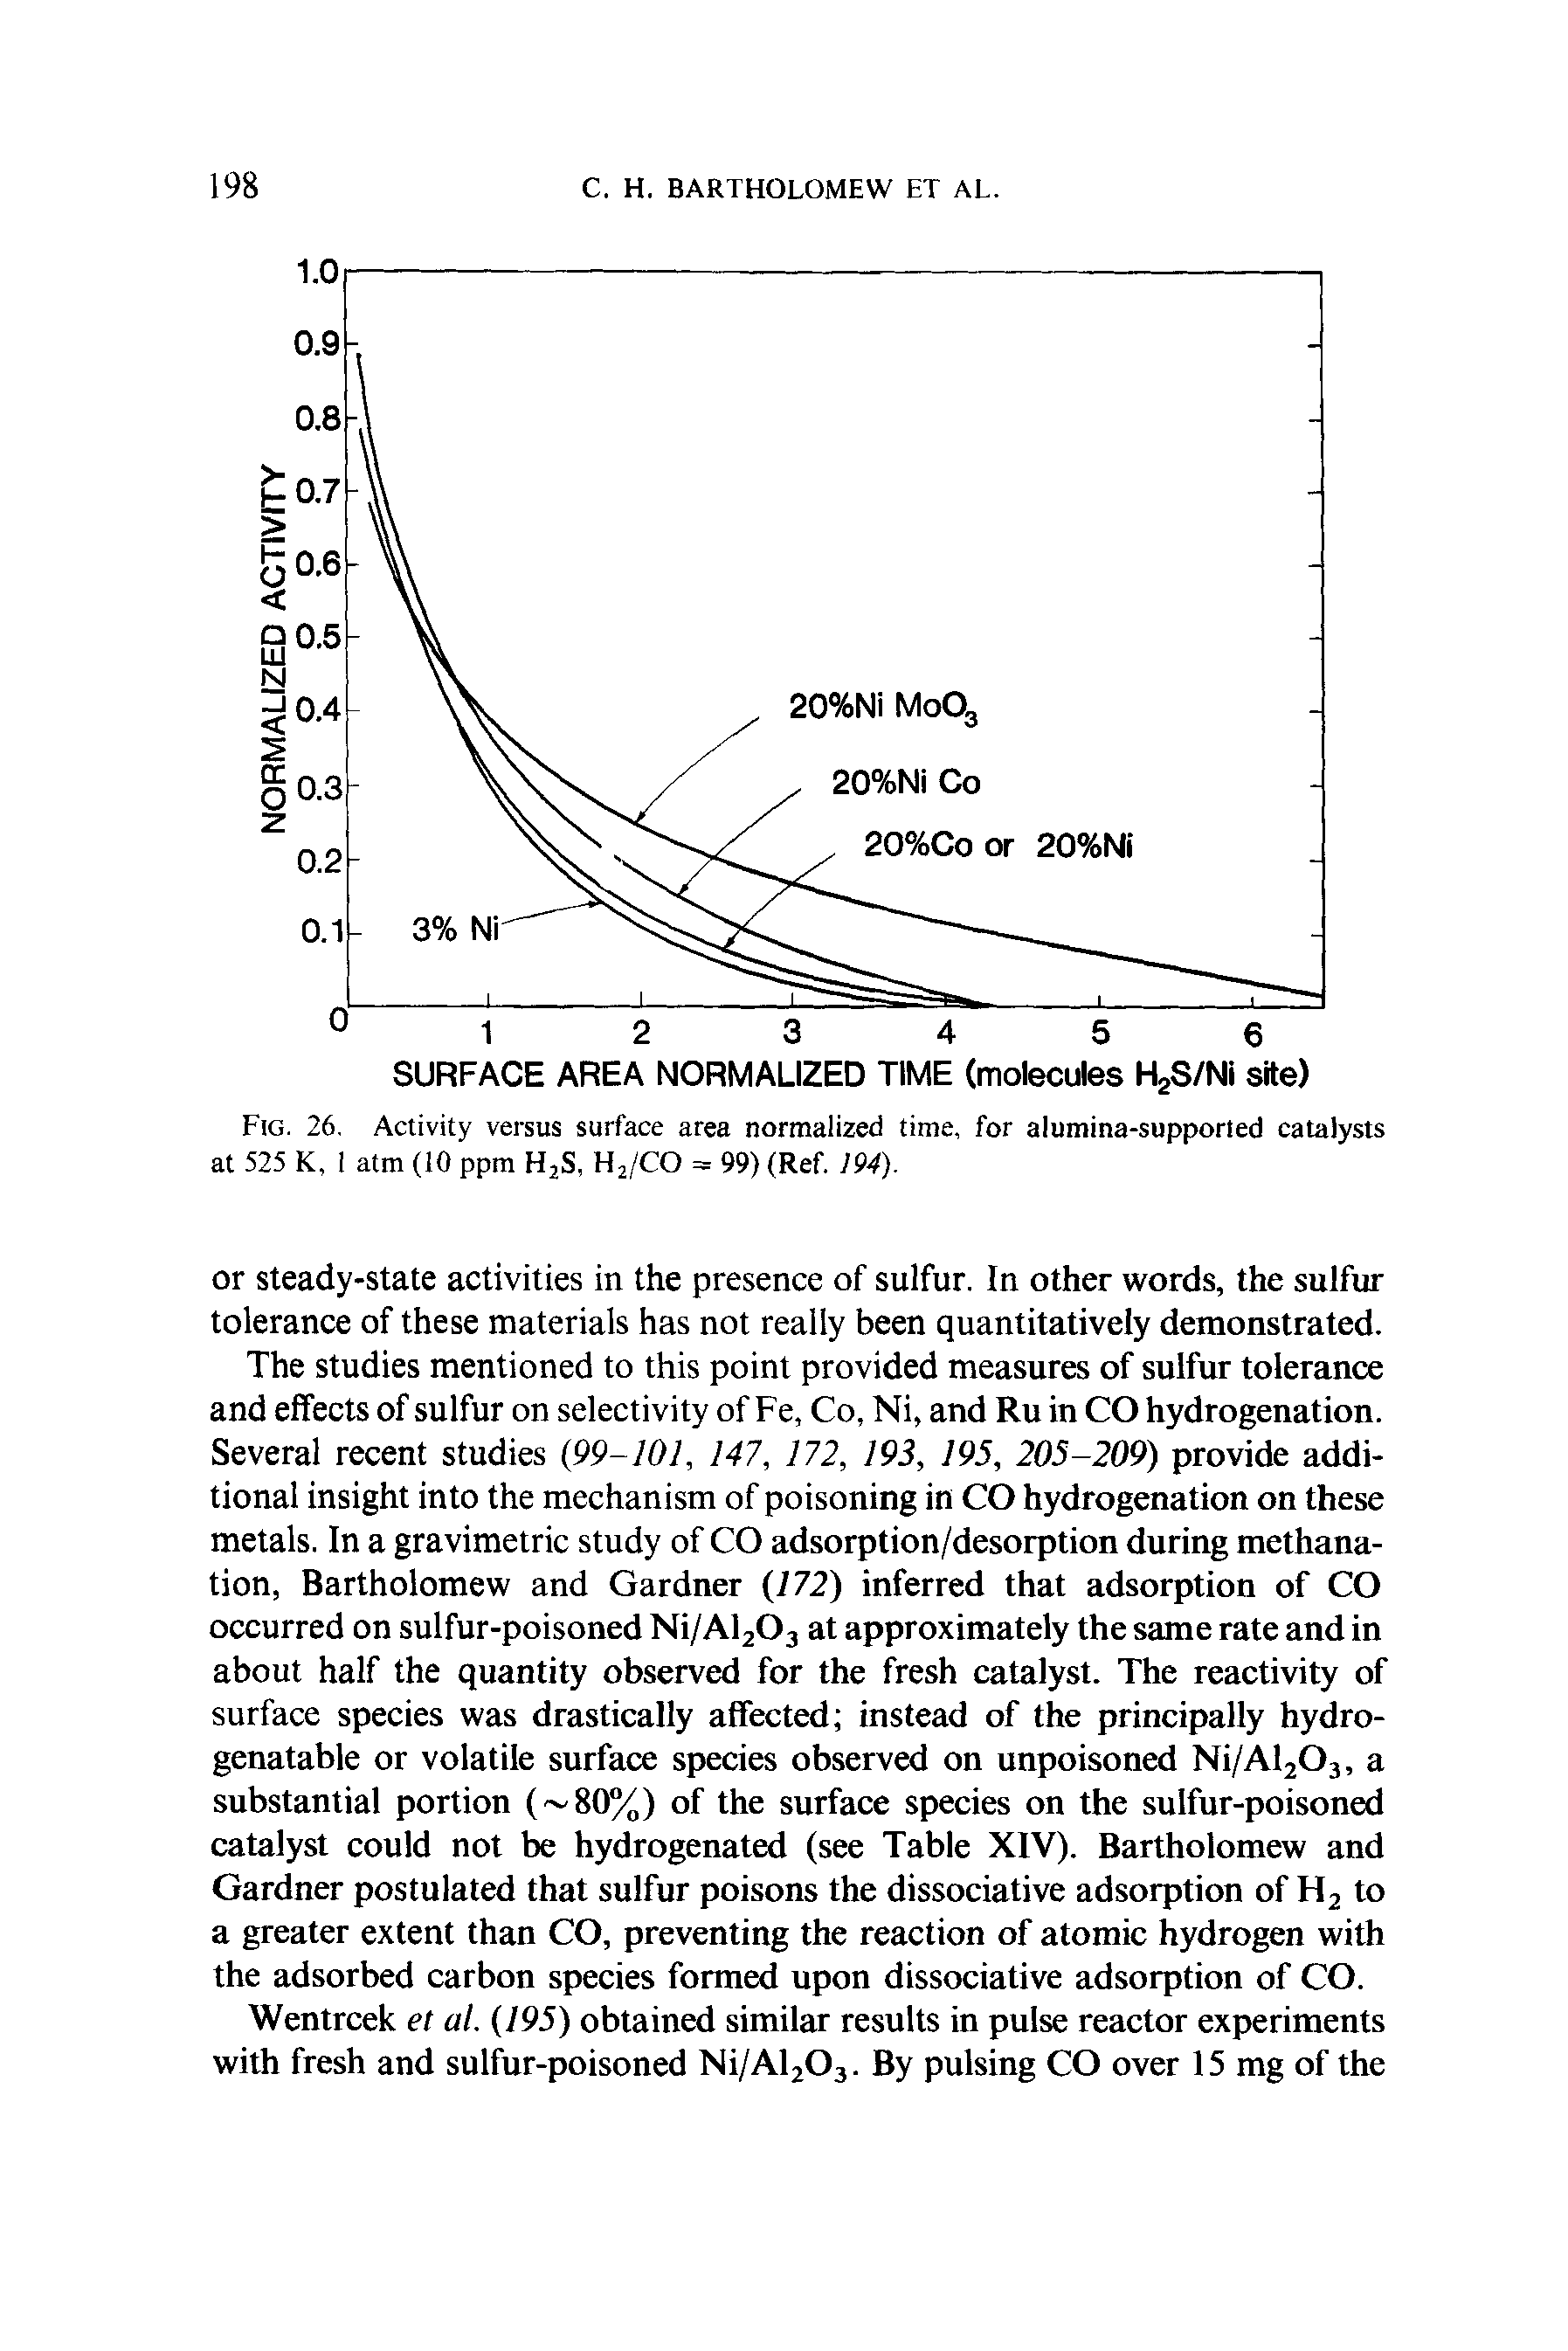 Fig. 26. Activity versus surface area normalized time, for alumina-supported catalysts at 525 K, 1 atm (10 ppm H2S, H2/CO = 99) (Ref. 194).